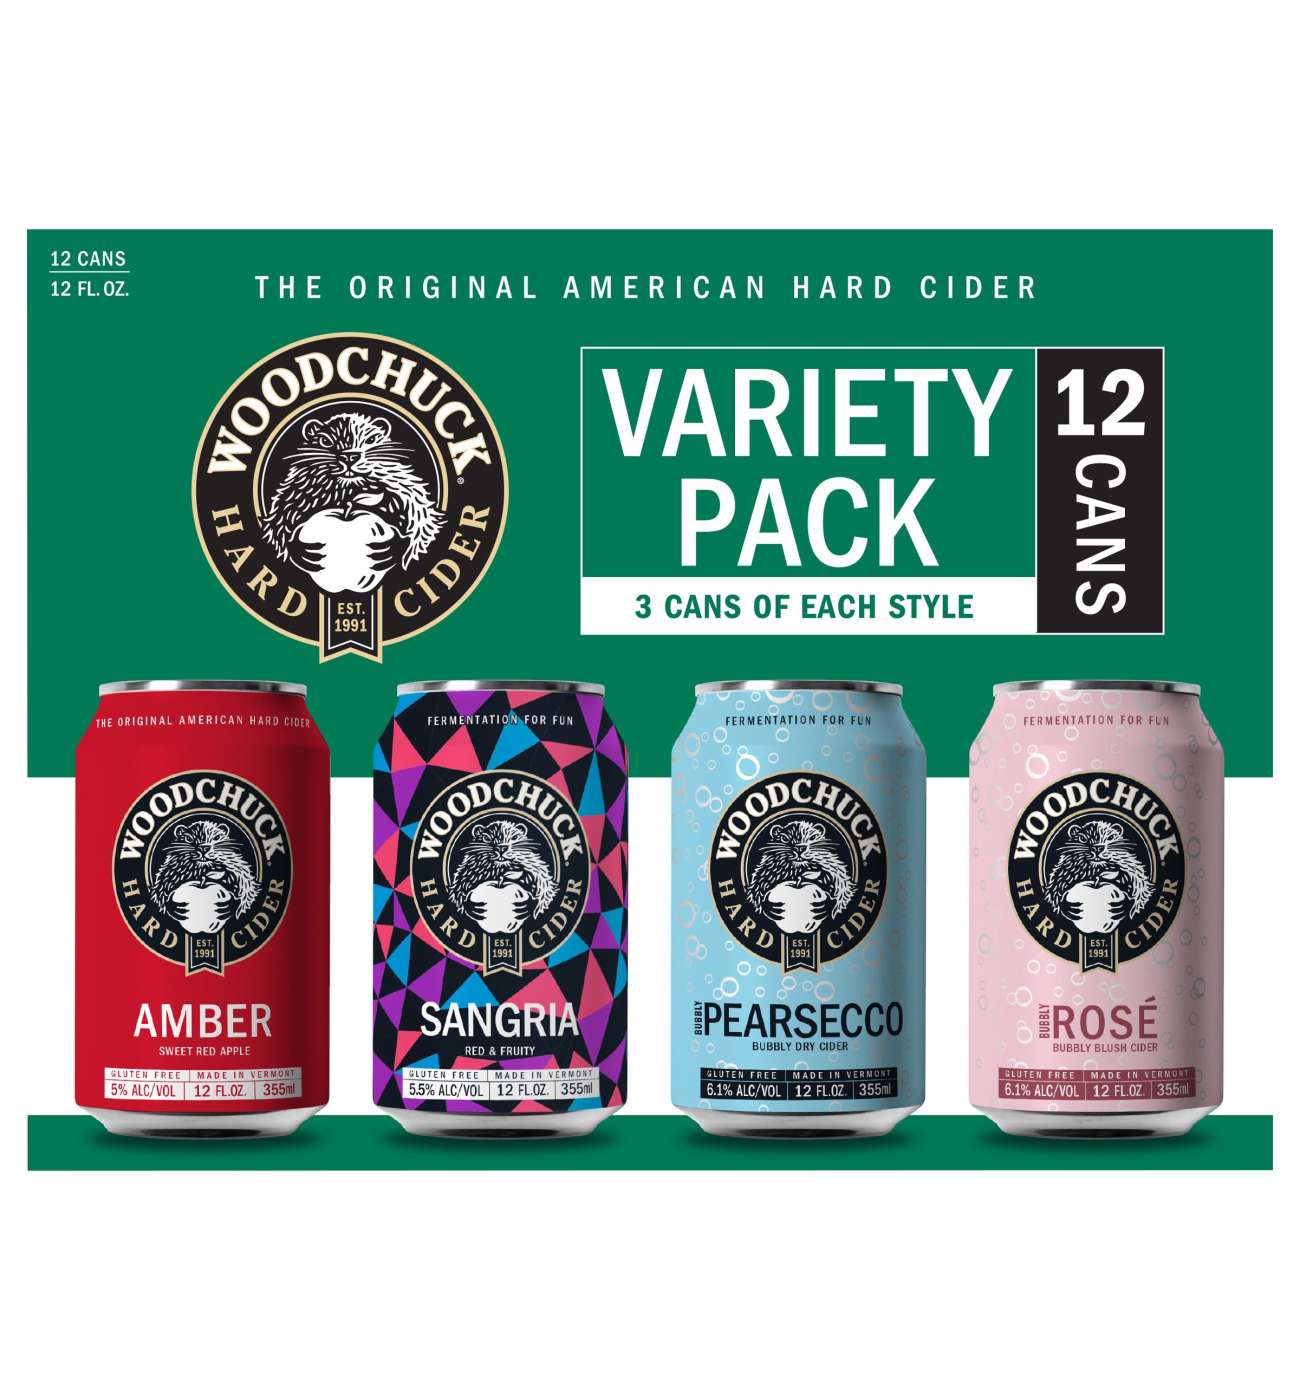 Woodchuck Hard Cider 12 oz Cans Variety Pack; image 2 of 2